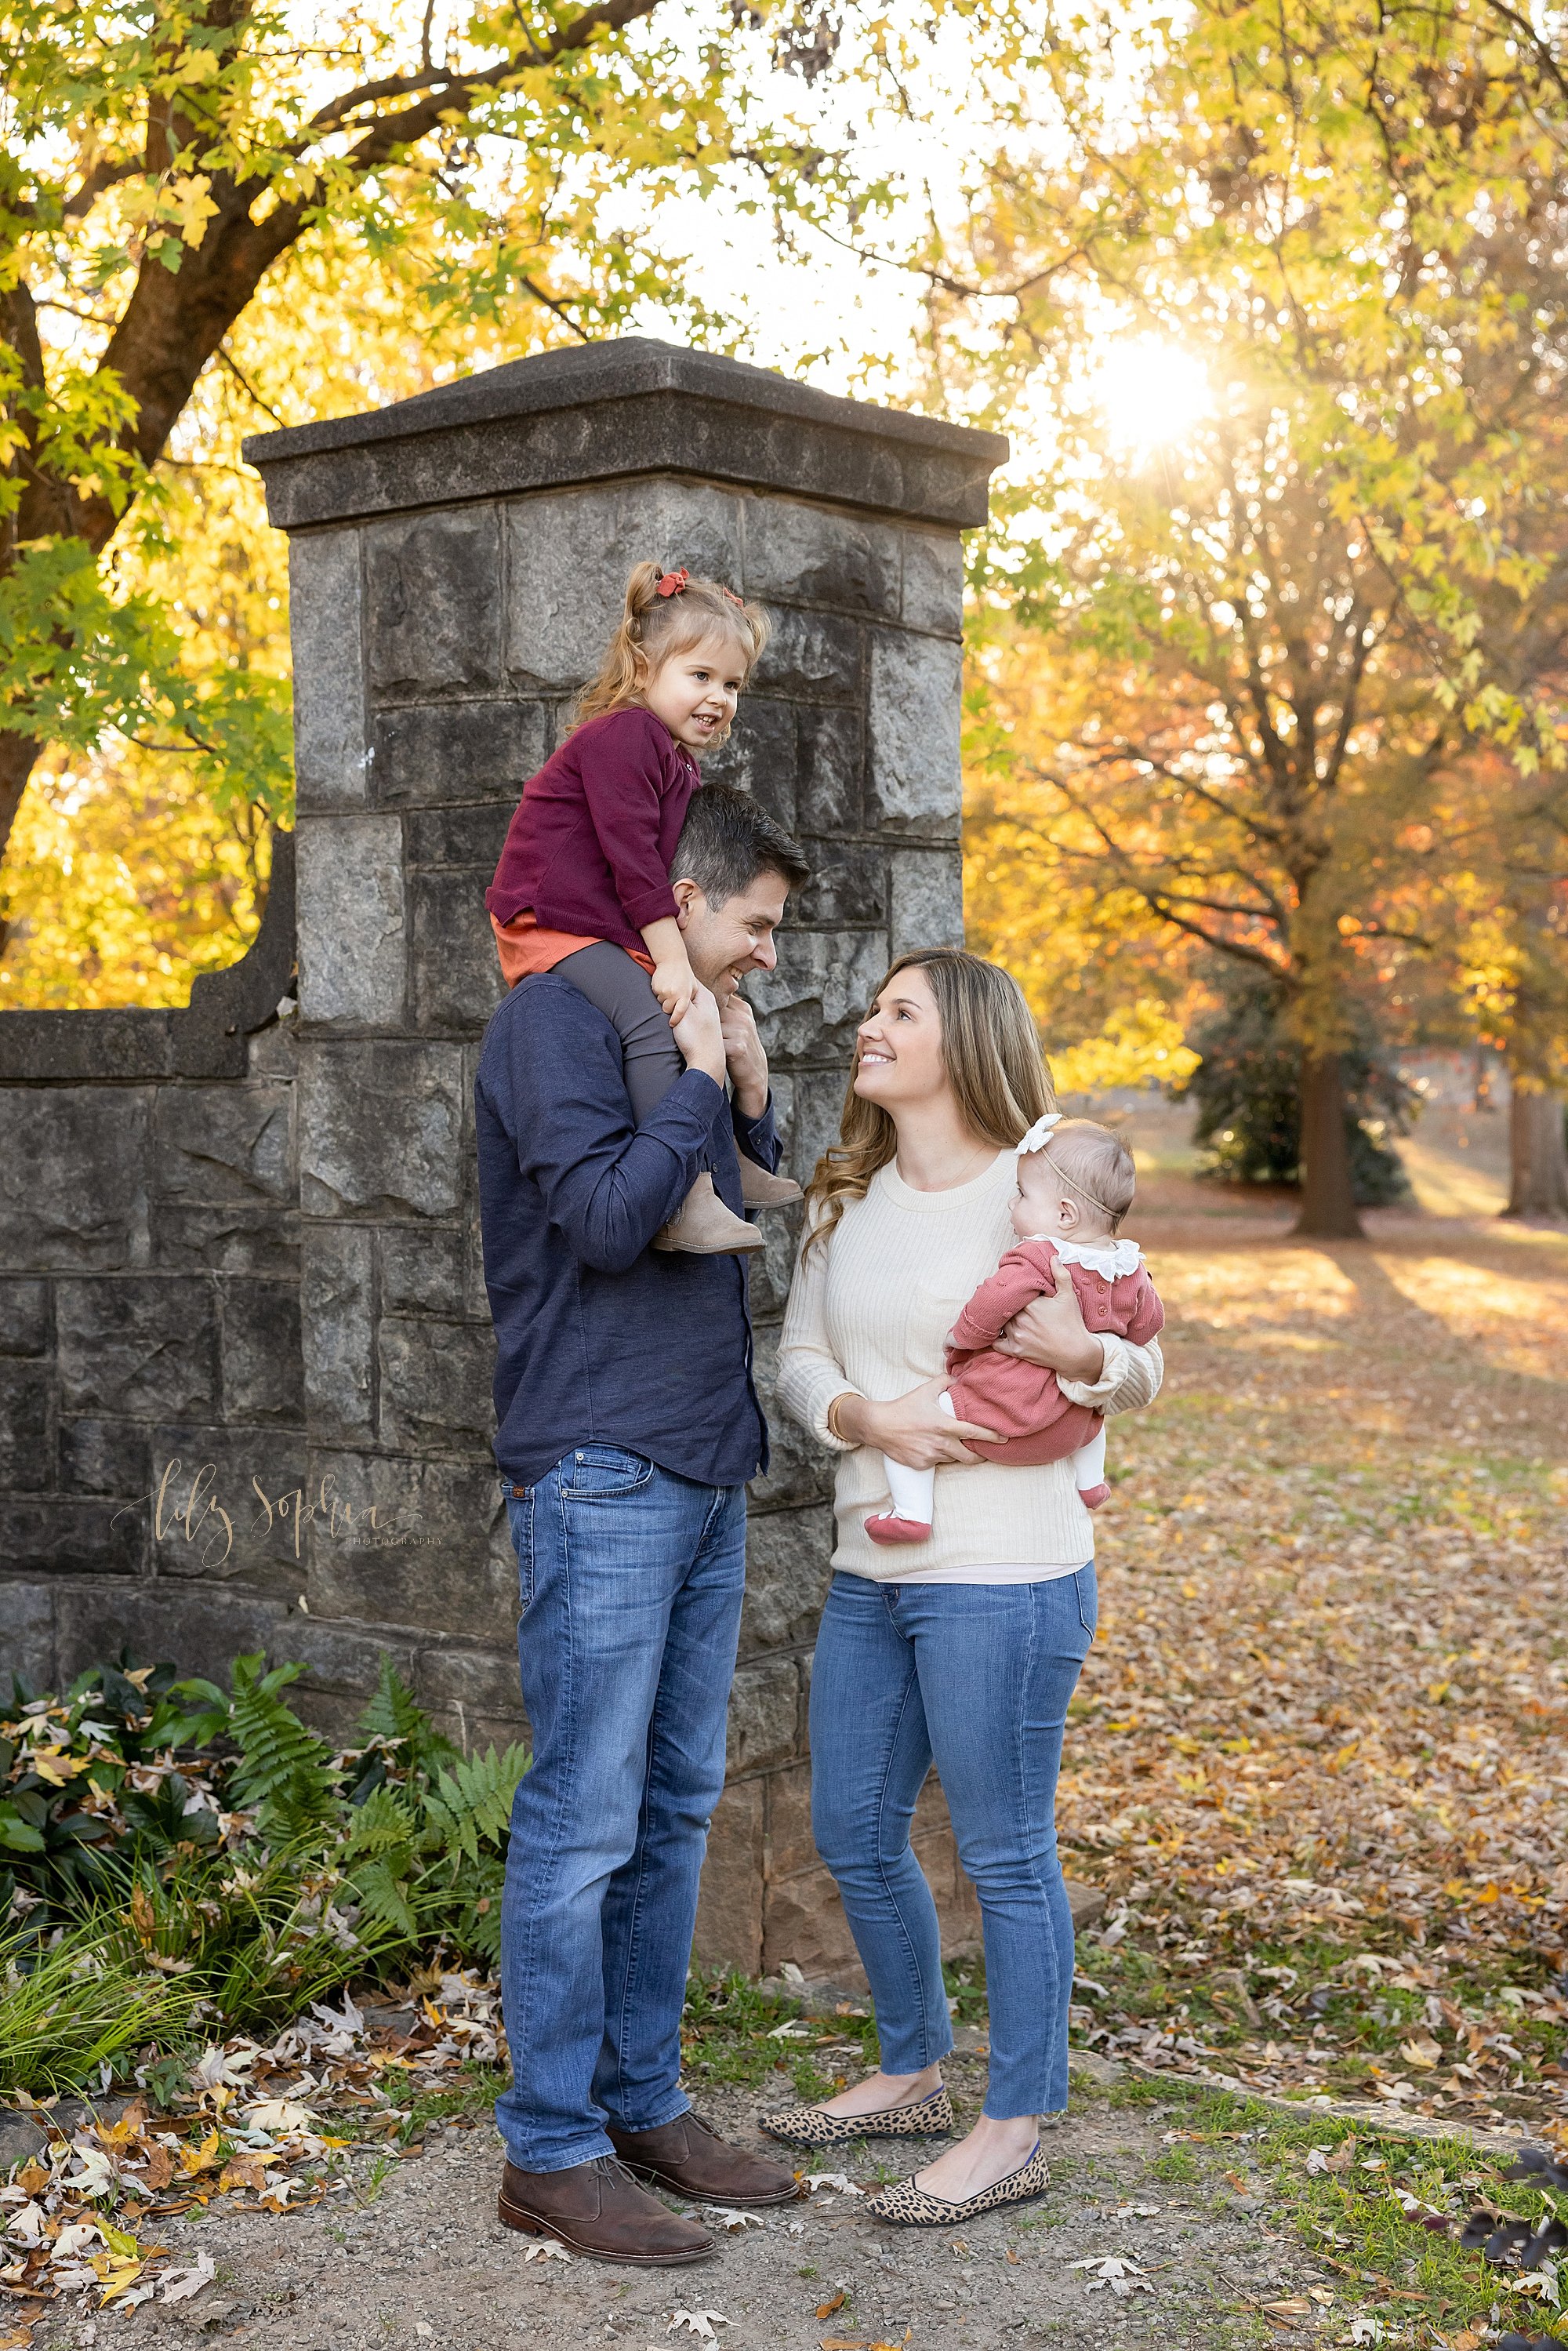  Fun family portrait taken at sunset in front of a stone entranceway at a park near Atlanta with a father carrying his toddler daughter on his shoulders as his wife holds their baby girl on her right hip as the two of them talk taken during autumn. 